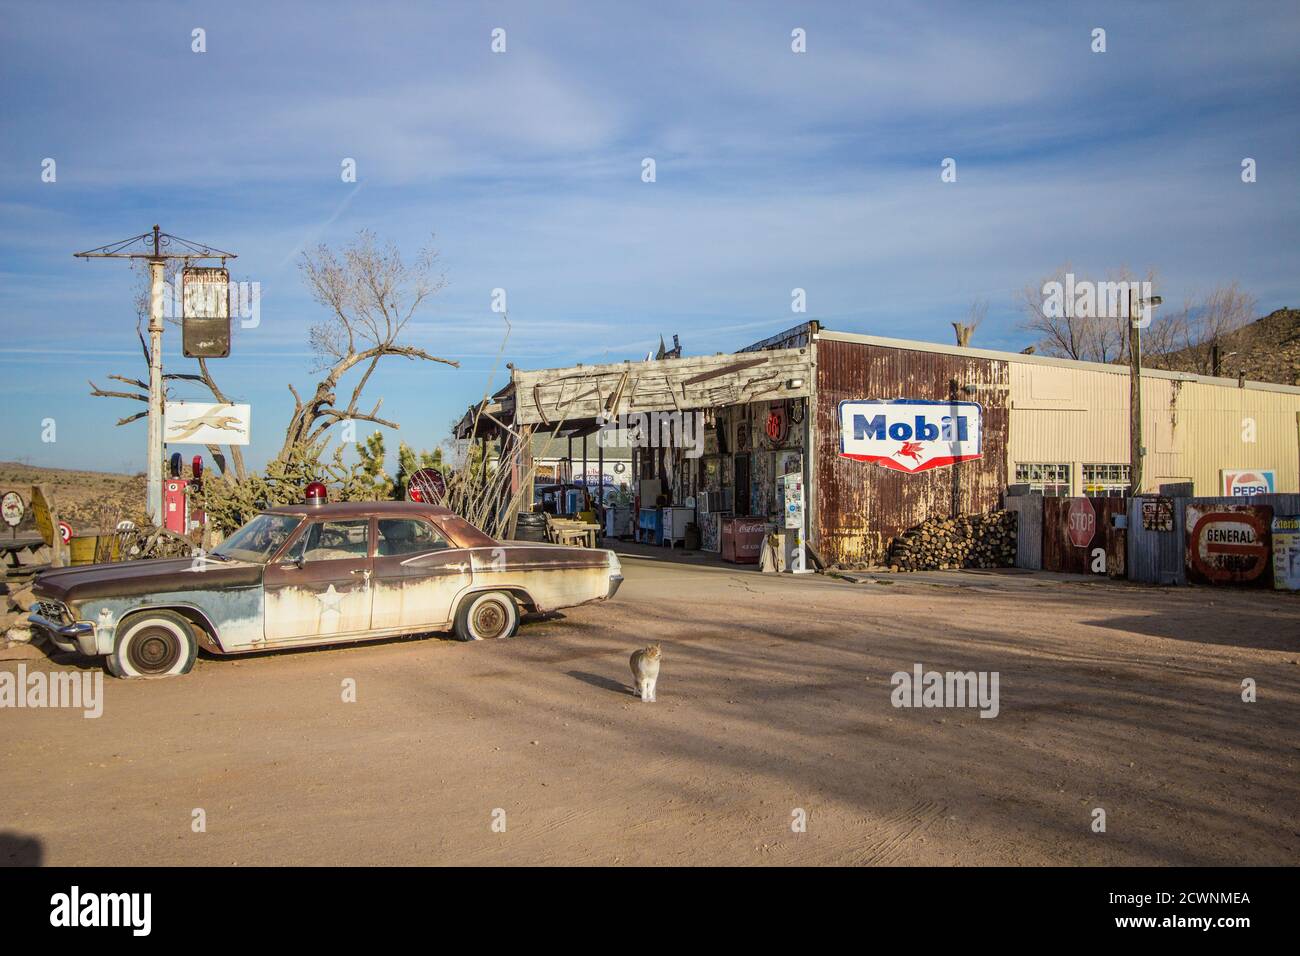 Exterior of the historic Hackberry General Store in Arizona. The store is a popular stop and photo op on historic Route 66 in Arizona. Stock Photo